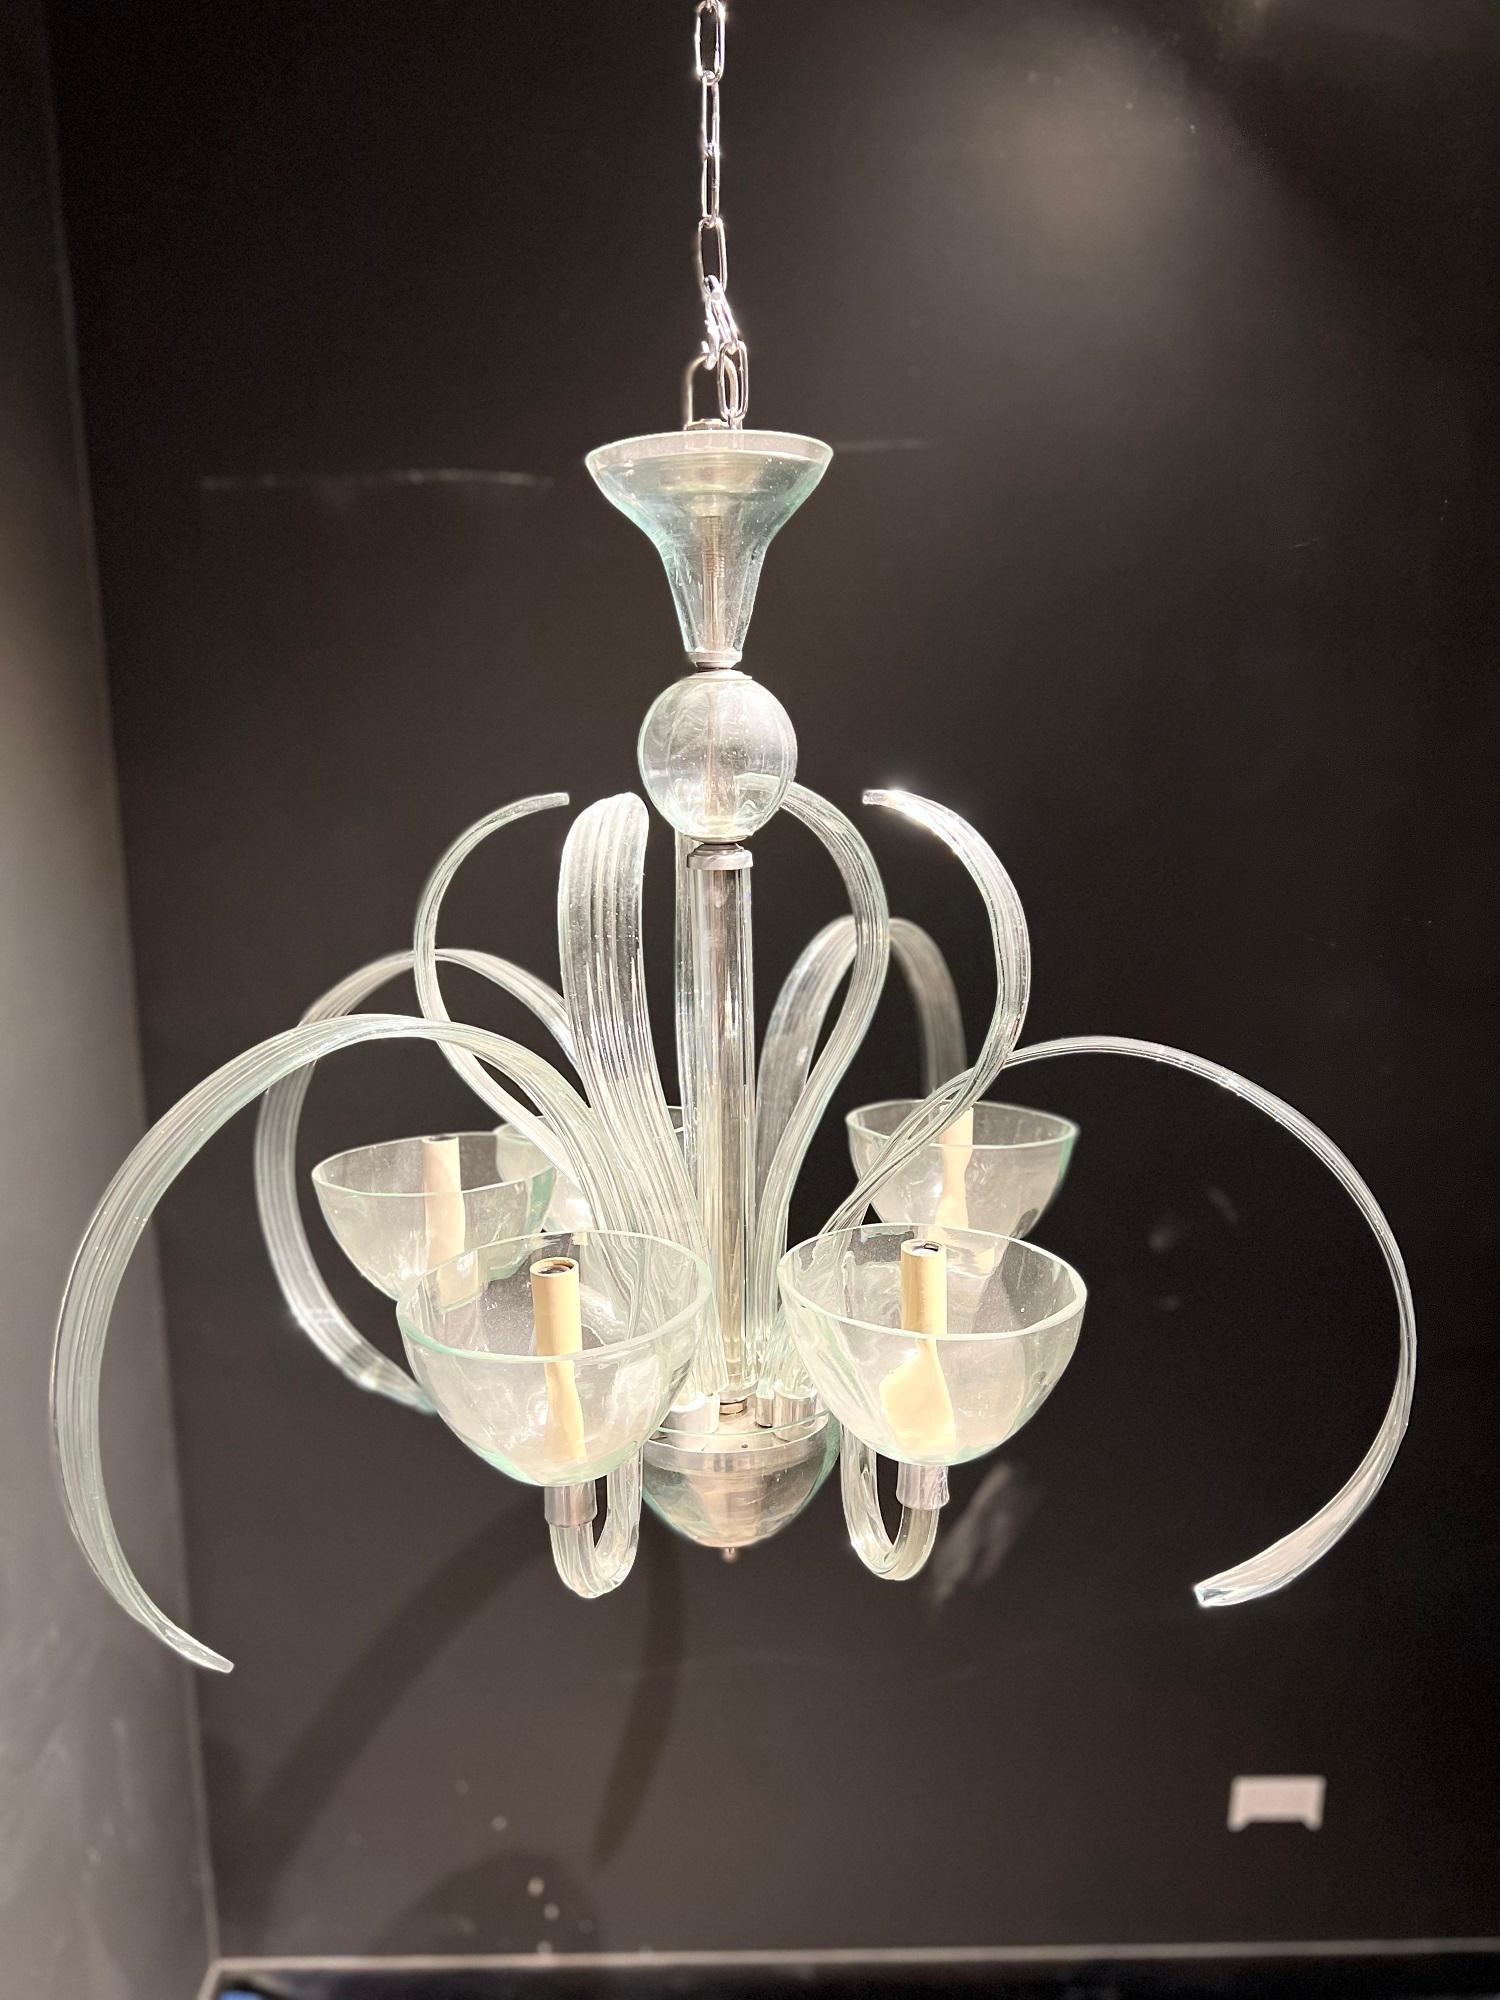 A Mirando clear glass chandelier with unique shape, circa 1940s. In very good vintage condition.

Dealer: G302YP